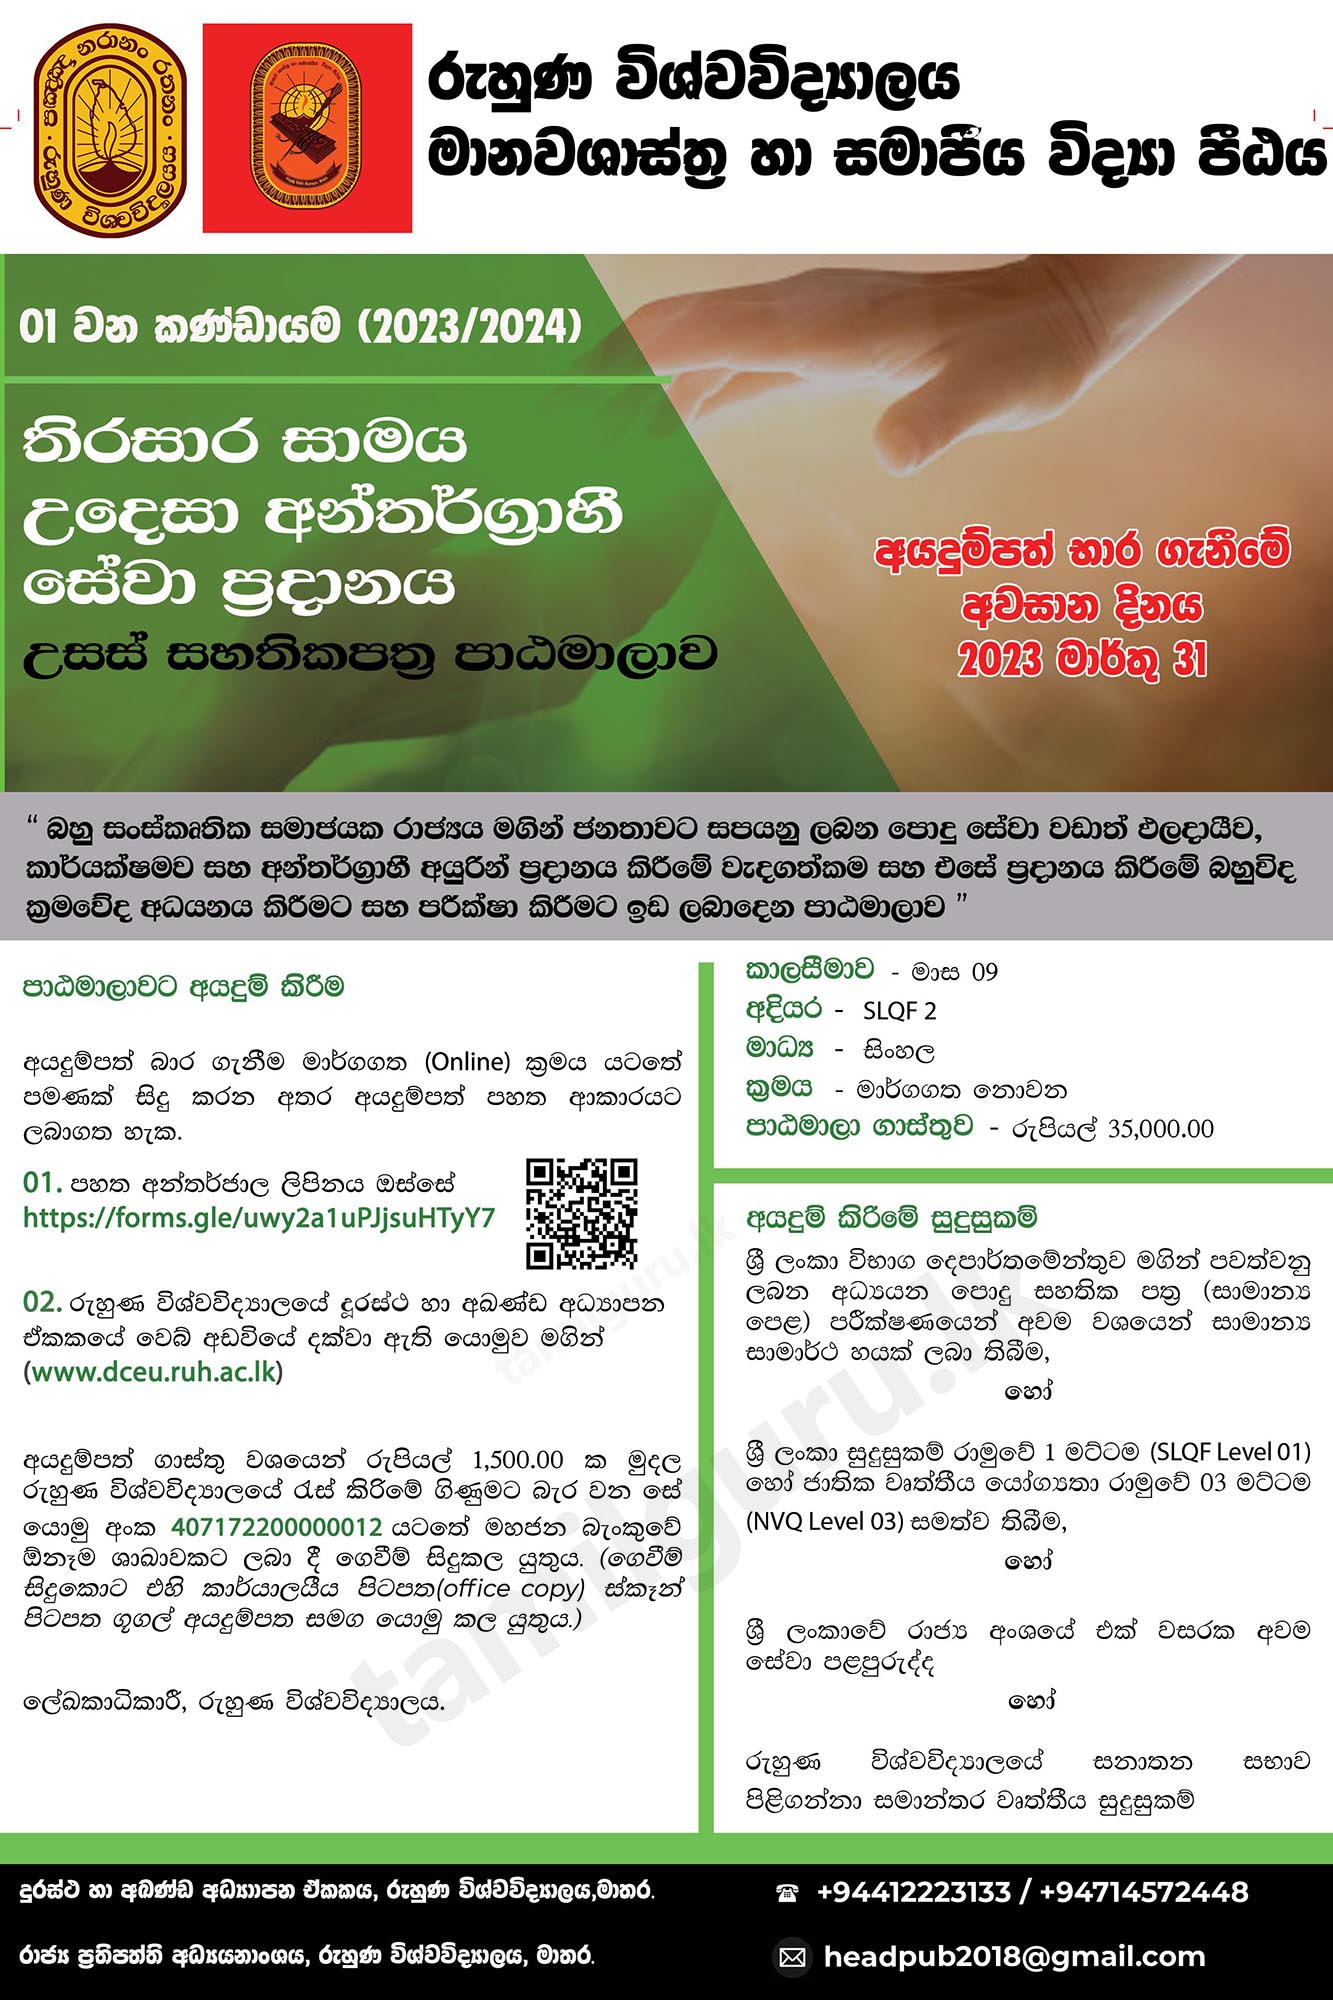 Advanced Certificate in Inclusive Service Delivery for Sustainable Peace 2023 - University of Ruhuna